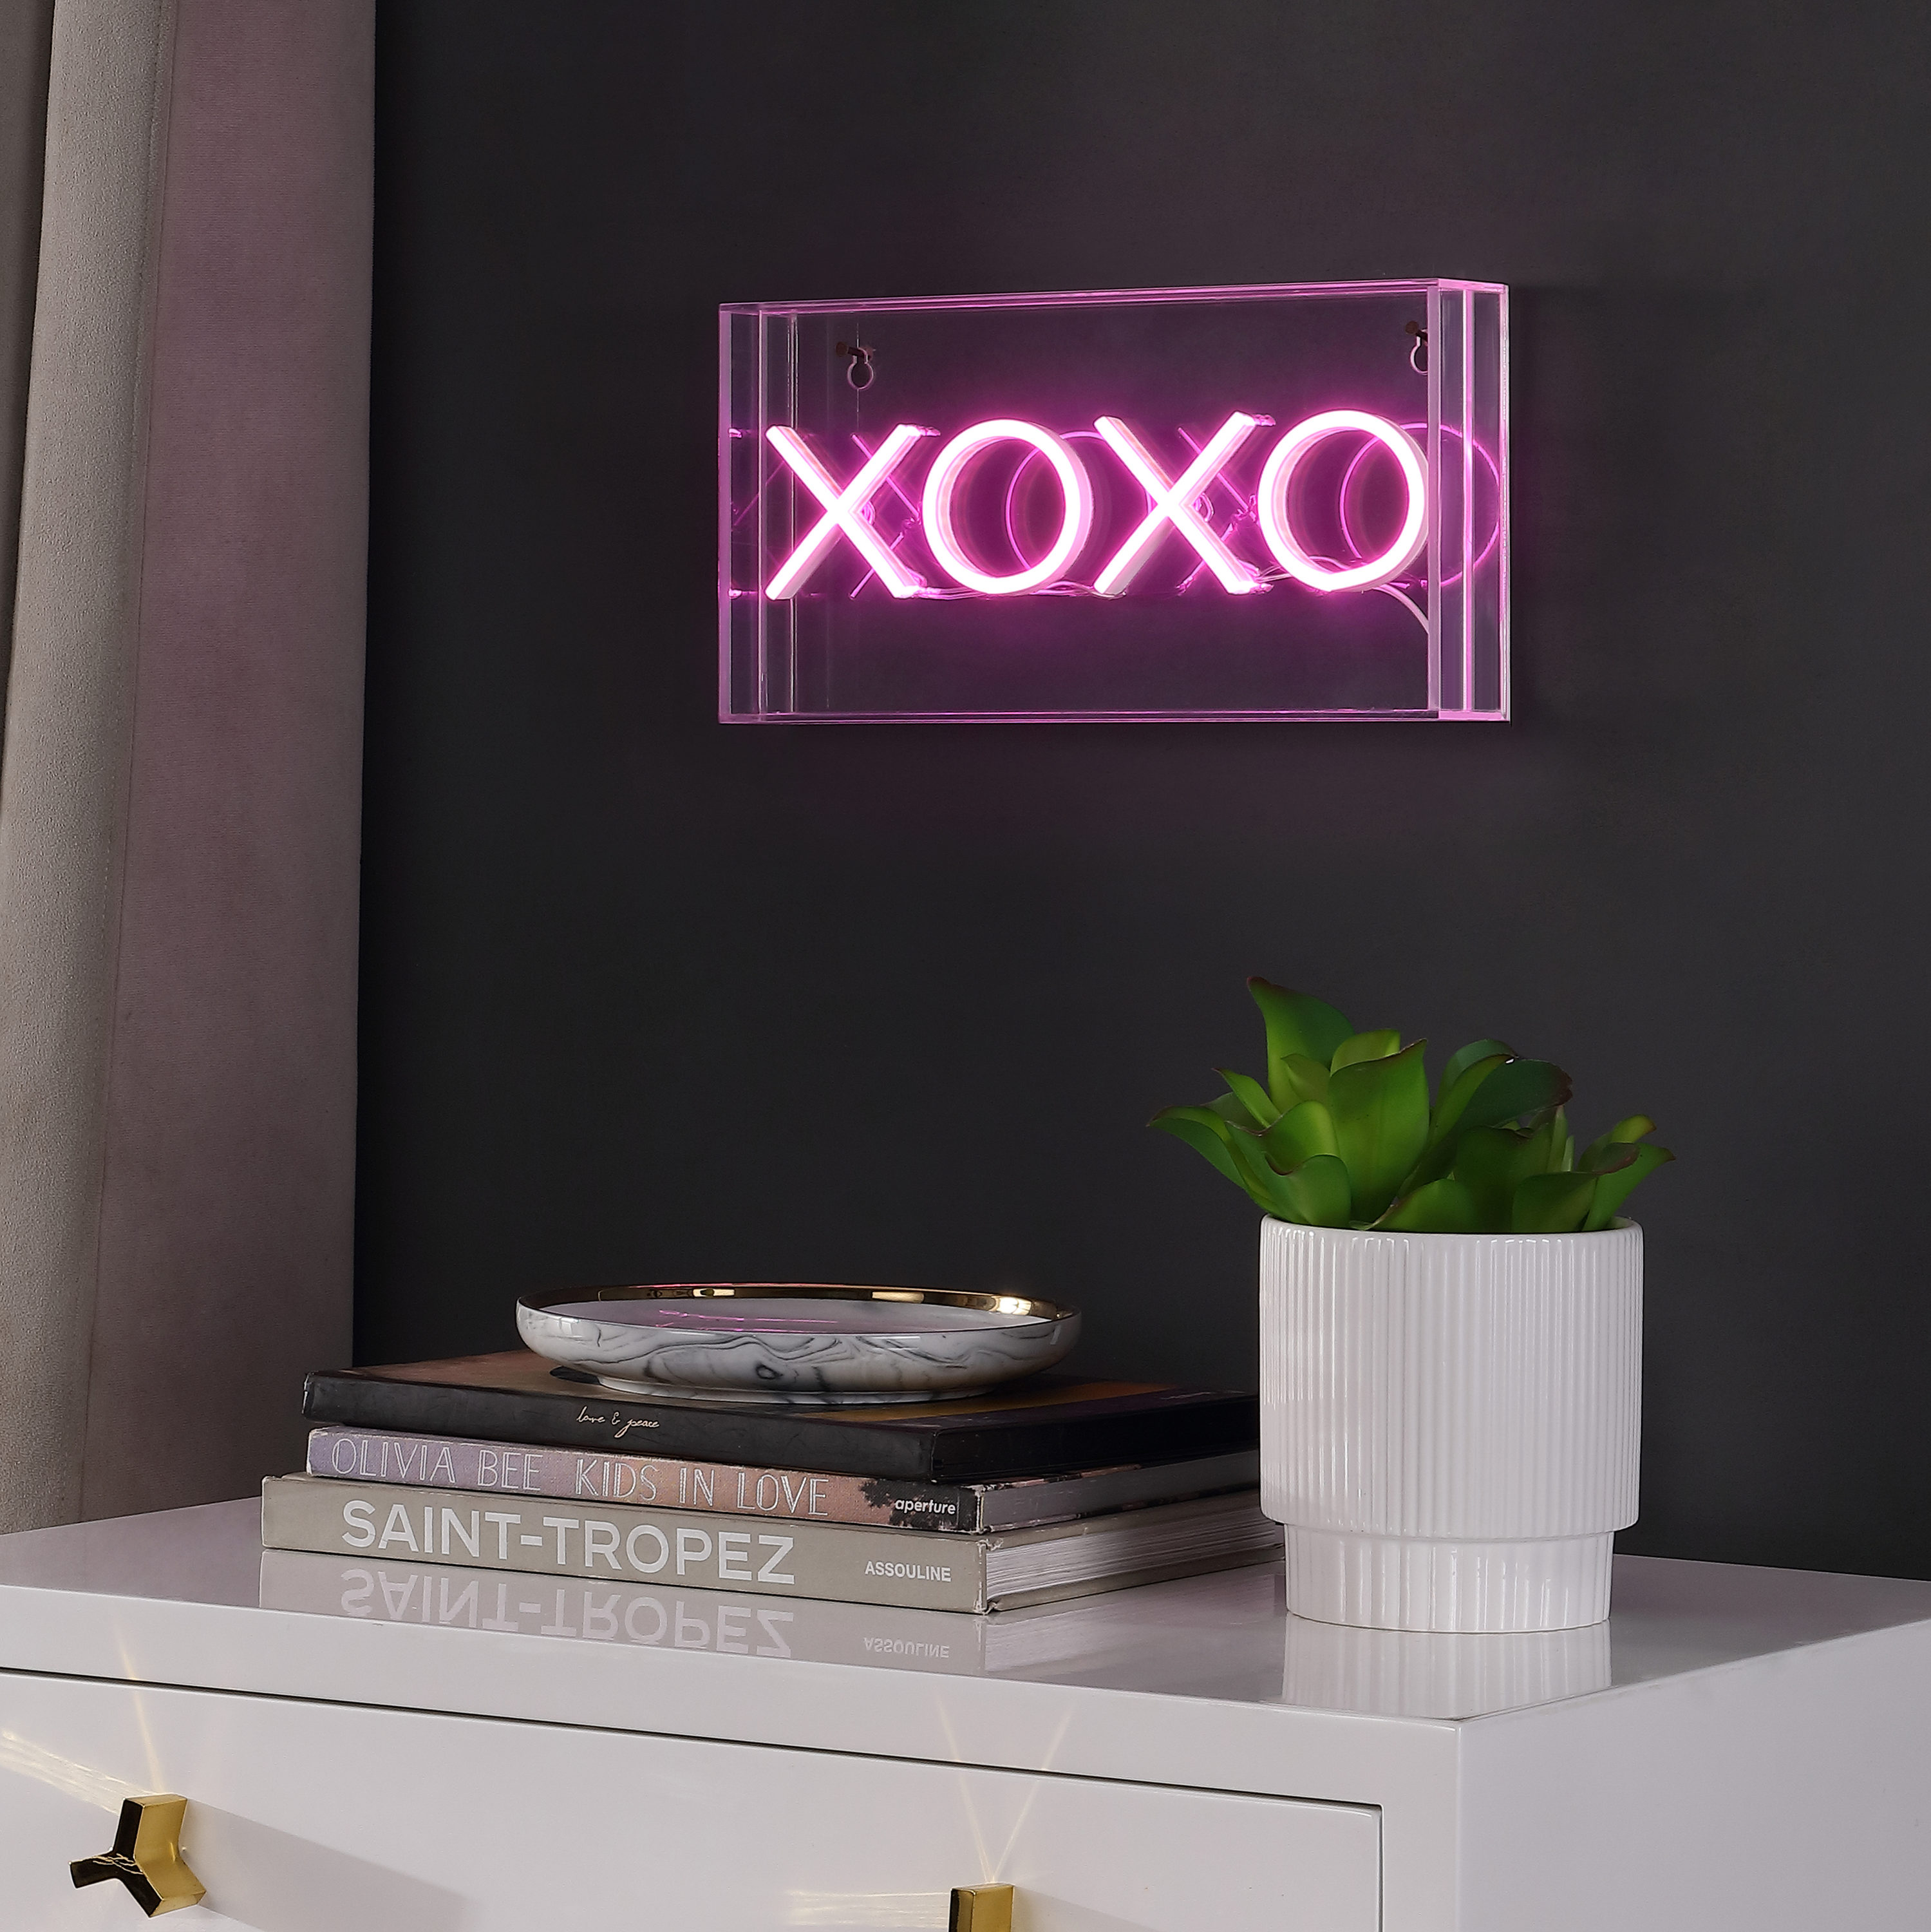 XOXO Heart Pink Neon Sign Lamp Light 14"x4" Acrylic Decor With Dimmer 